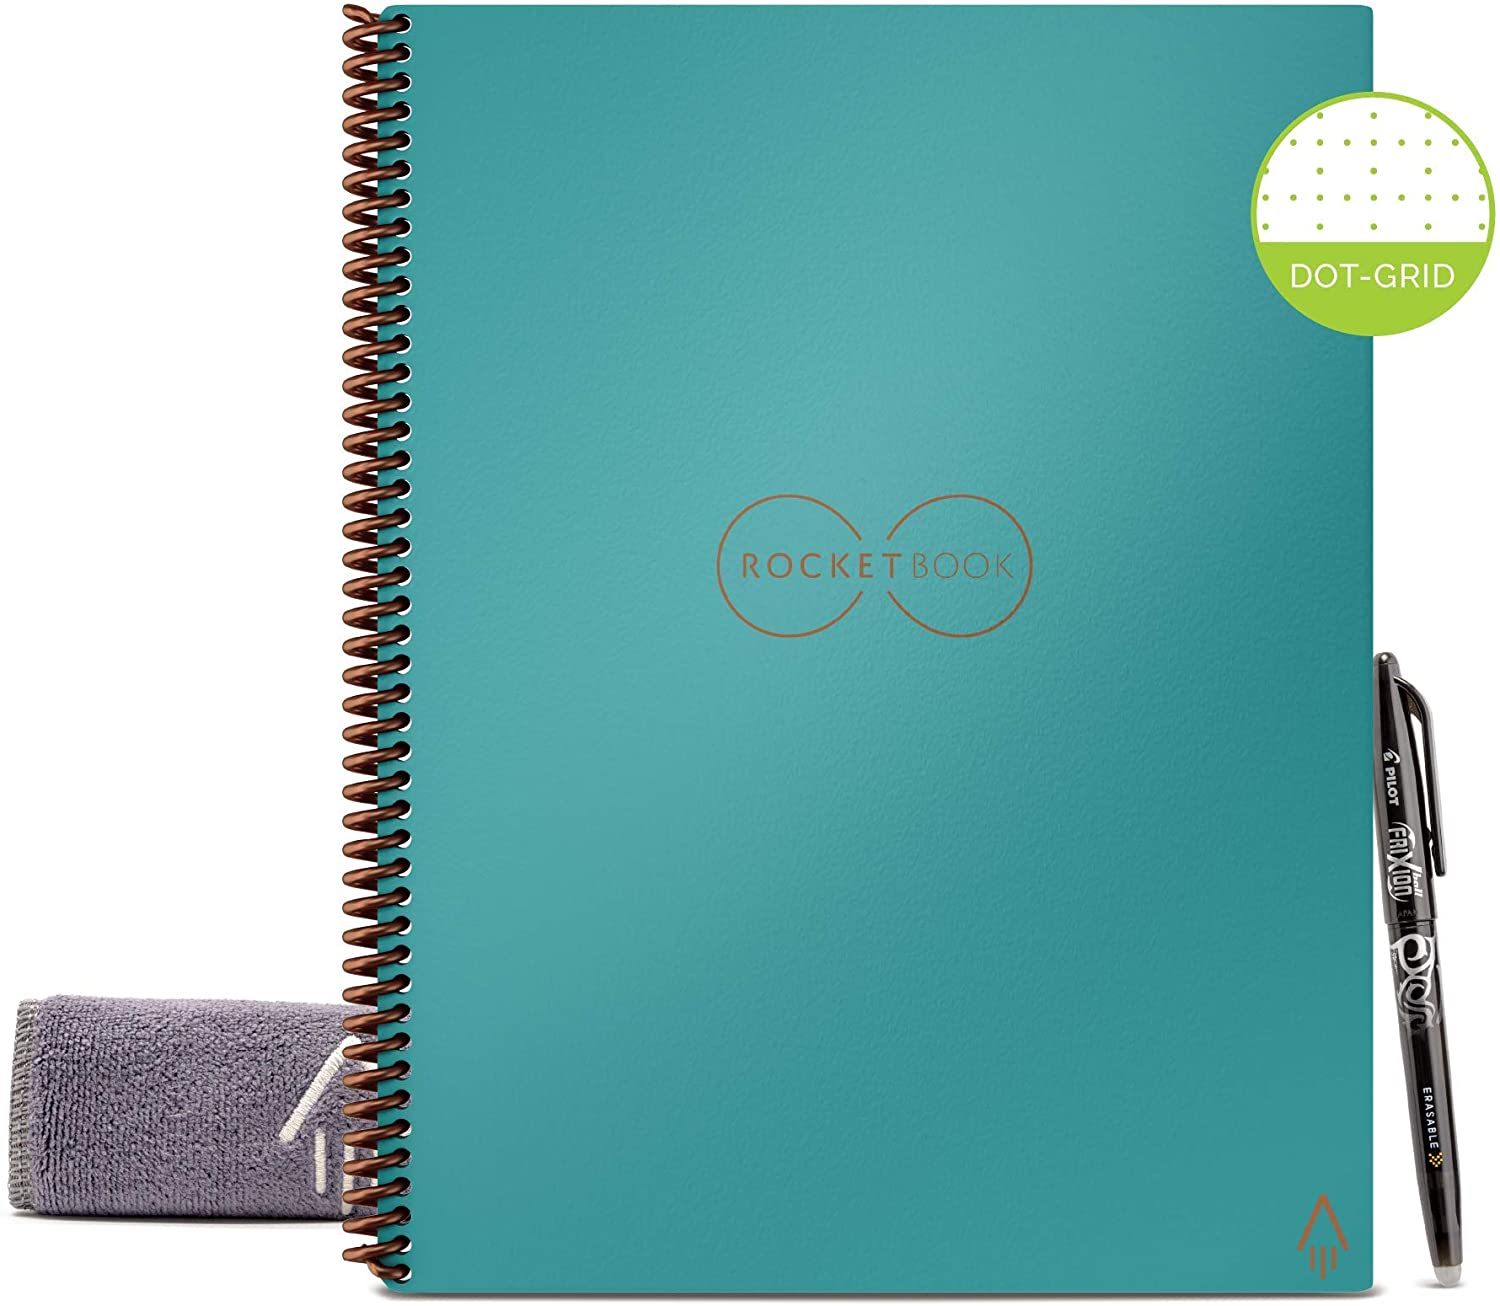 Smart notebook Gifts for Coworkers